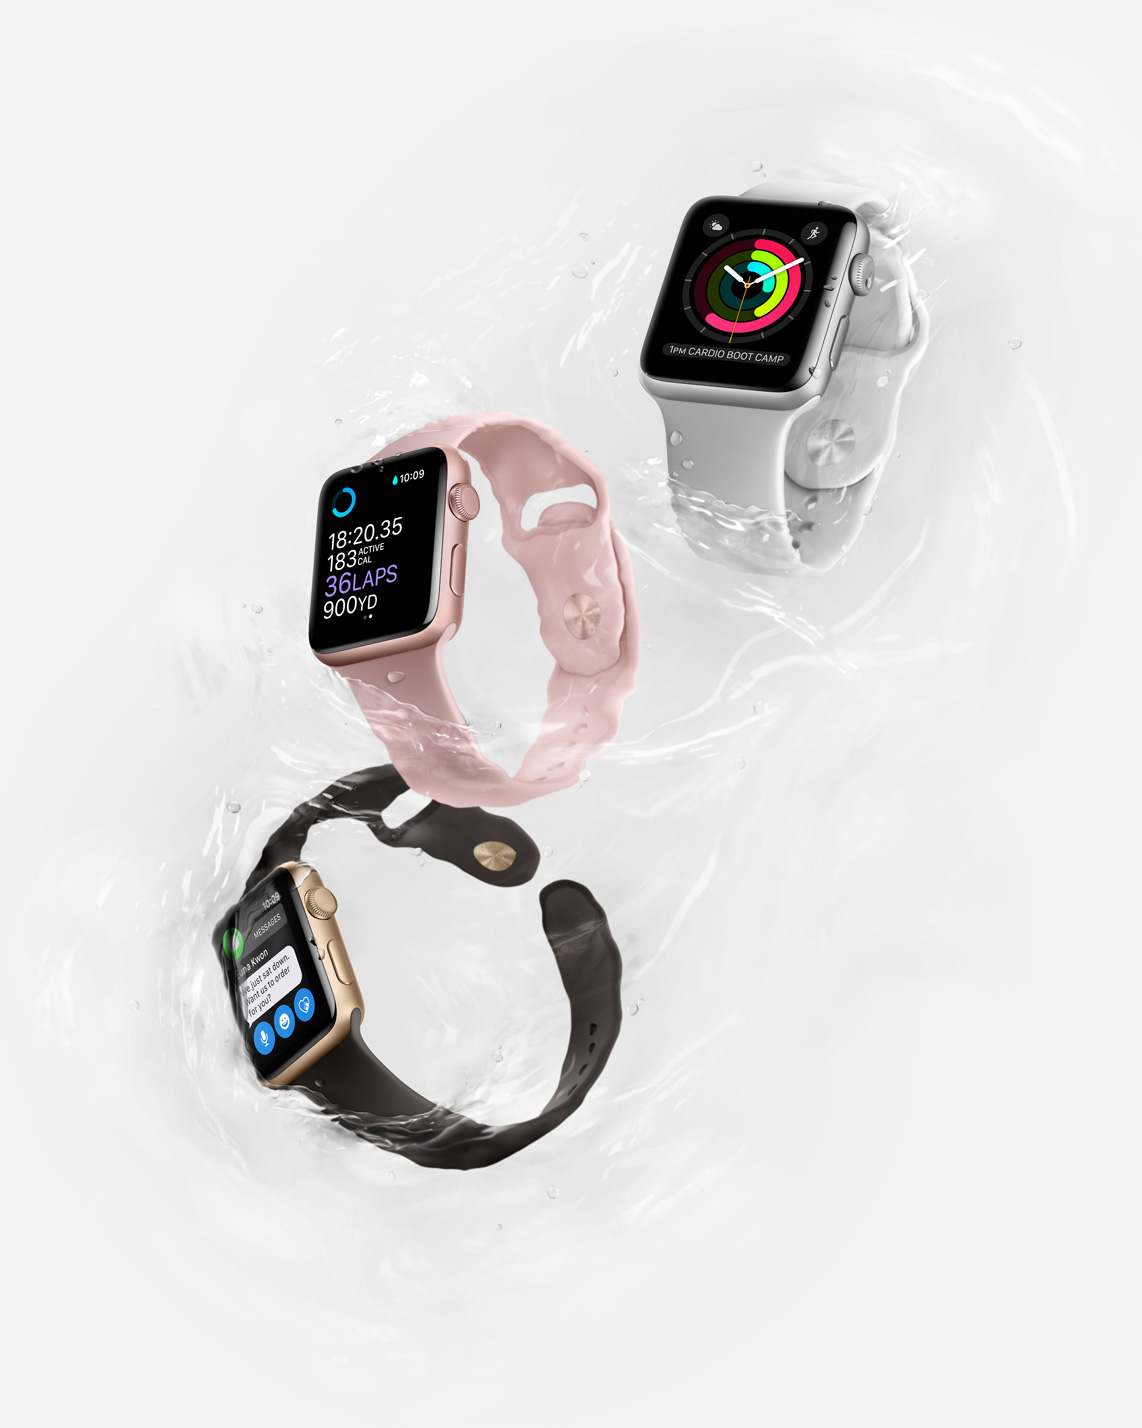 Apple Introduces Apple Watch Series 2, The Ultimate Device for a Healthy Life_2